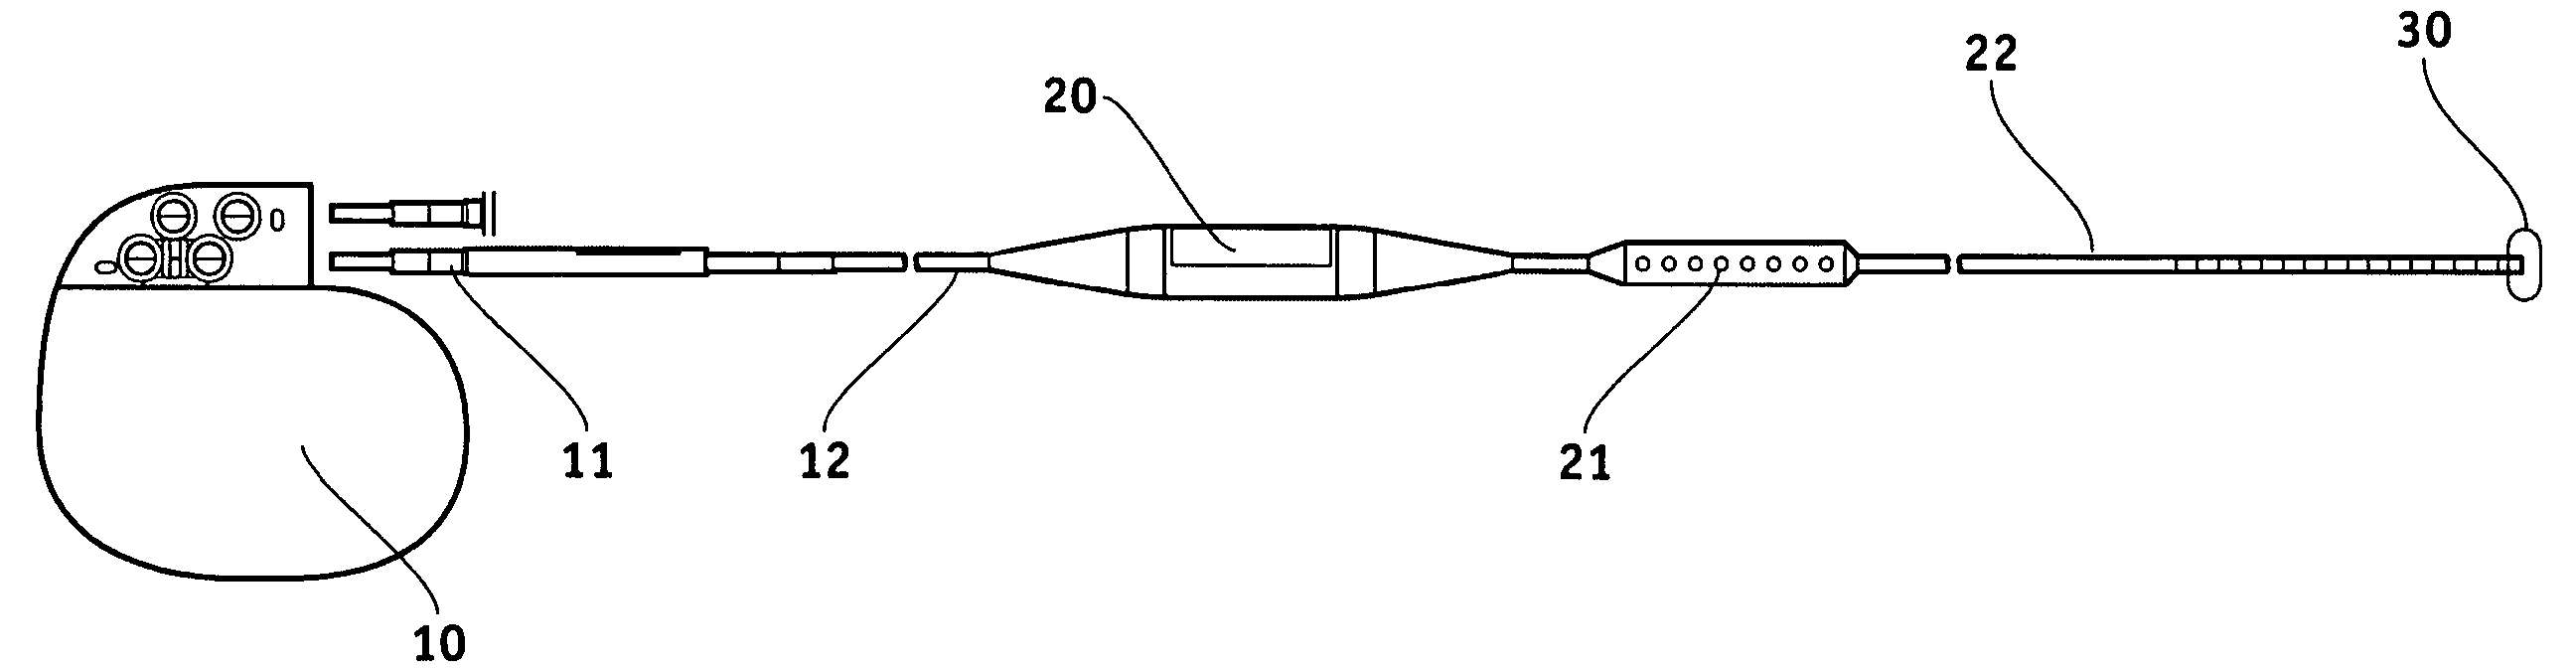 Electrical lead body including an in-line hermetic electronic package and implantable medical device using the same